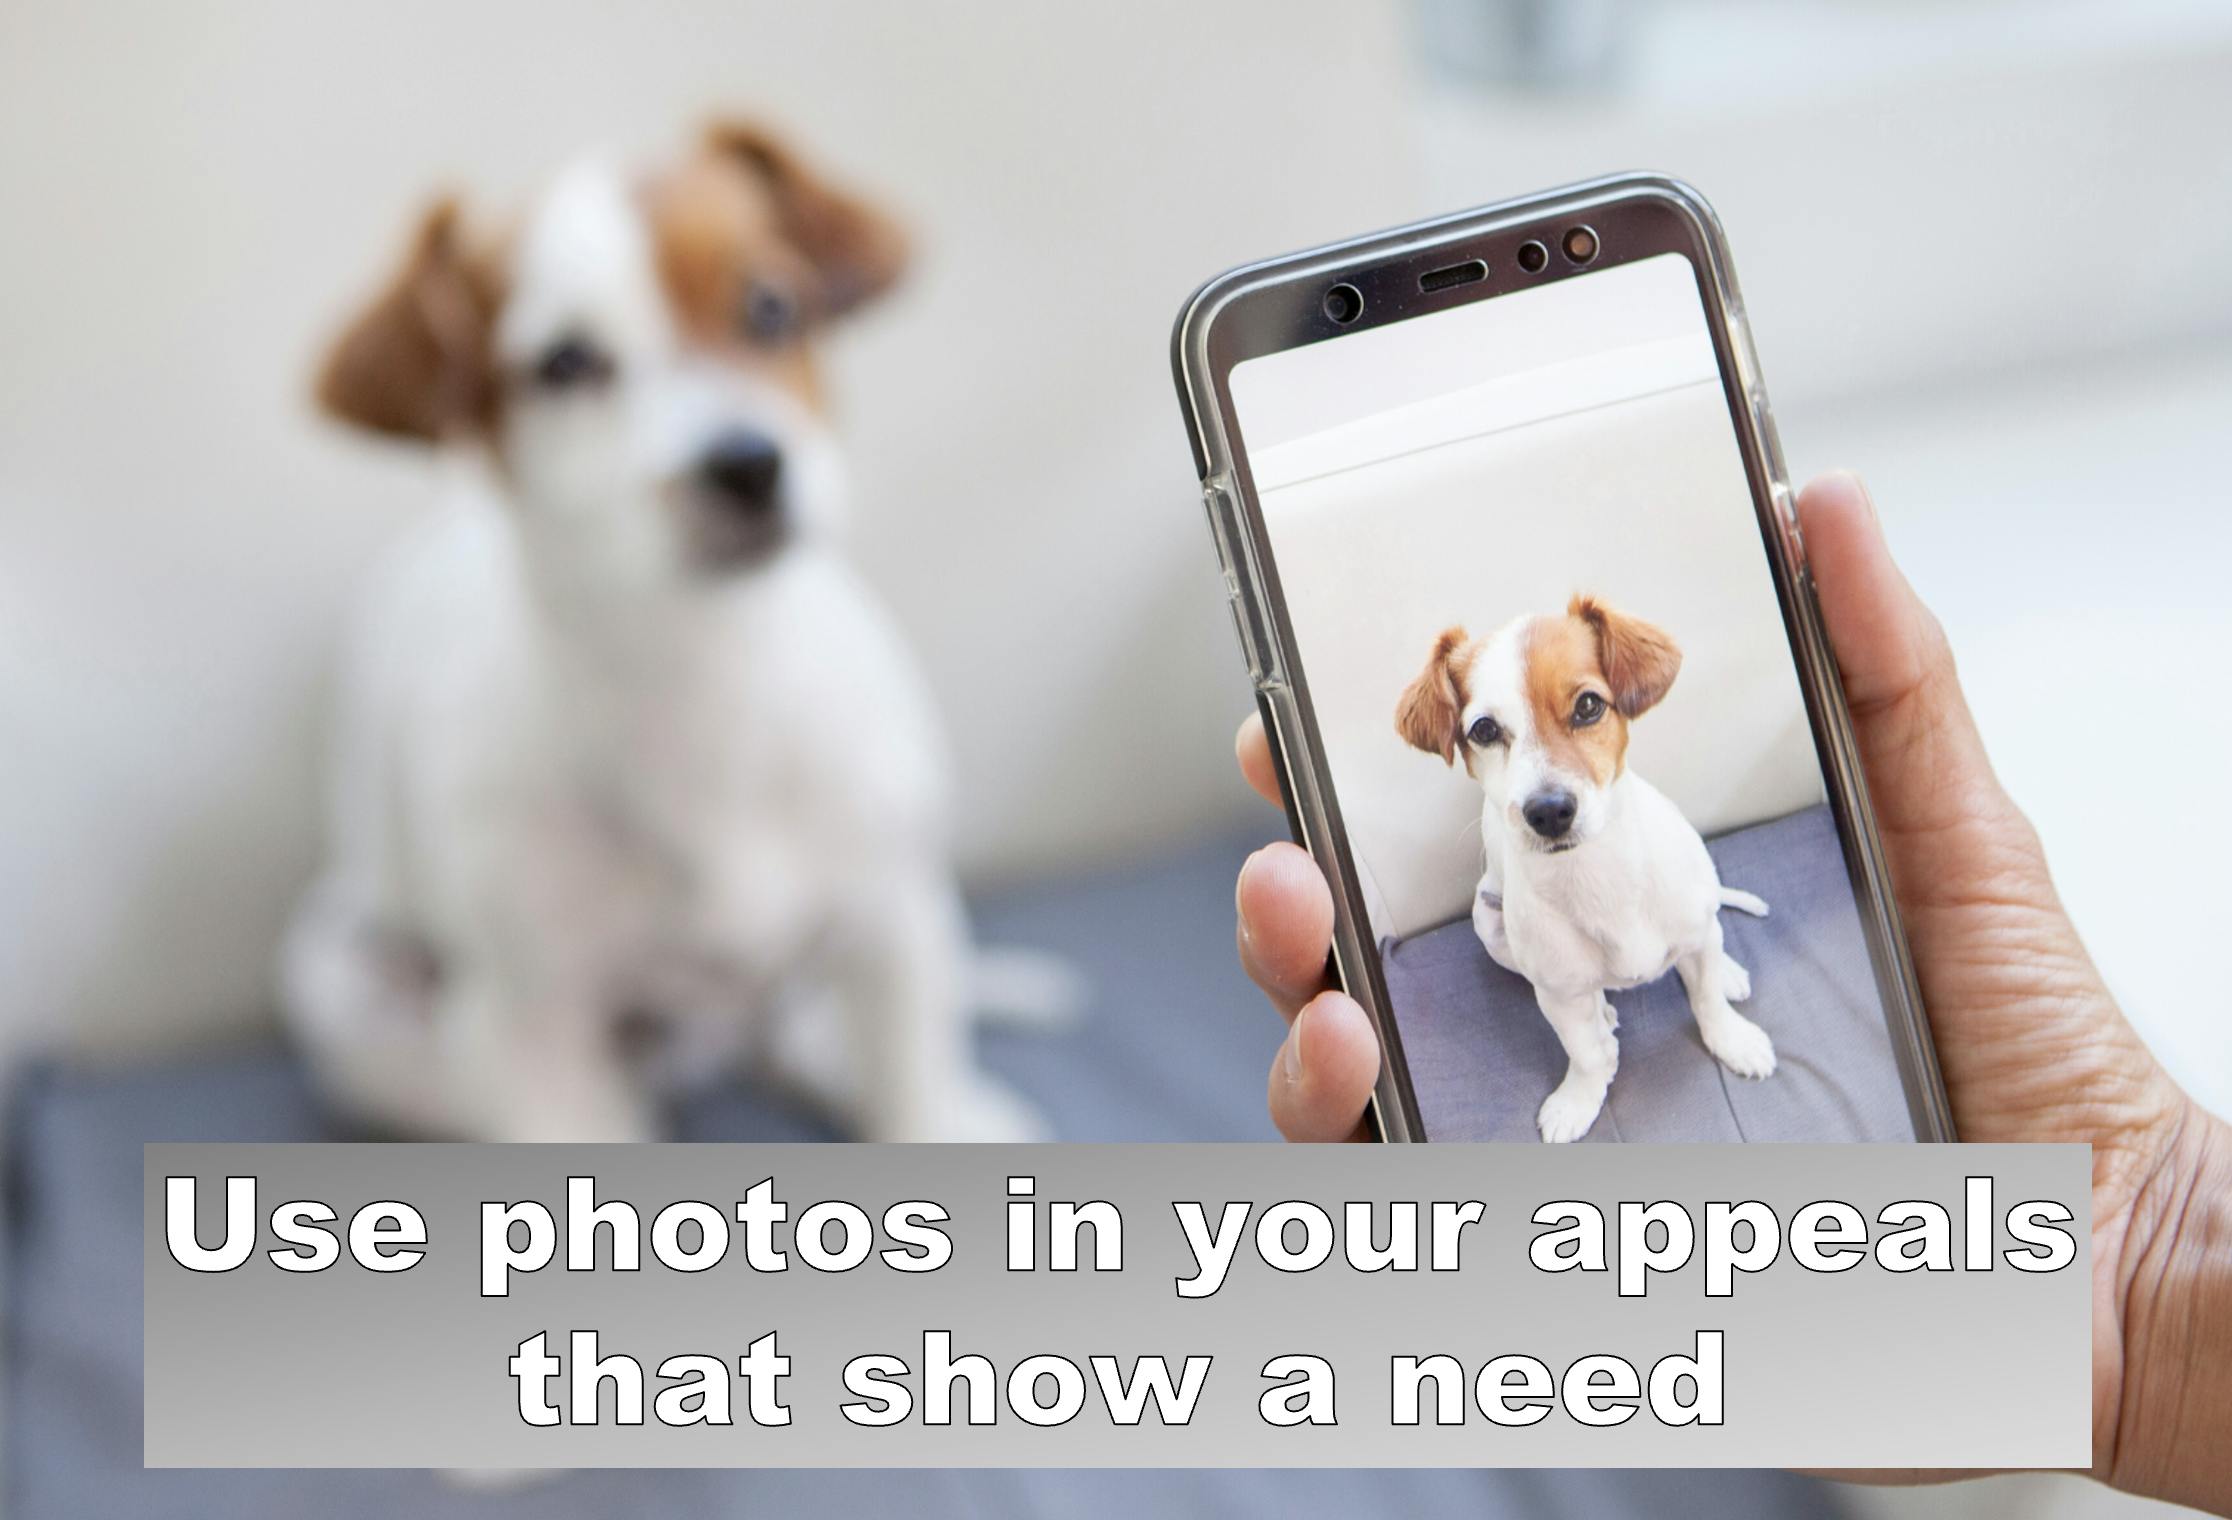 a photo of a dog, with the headline "Use photos in your appeals that show a need"